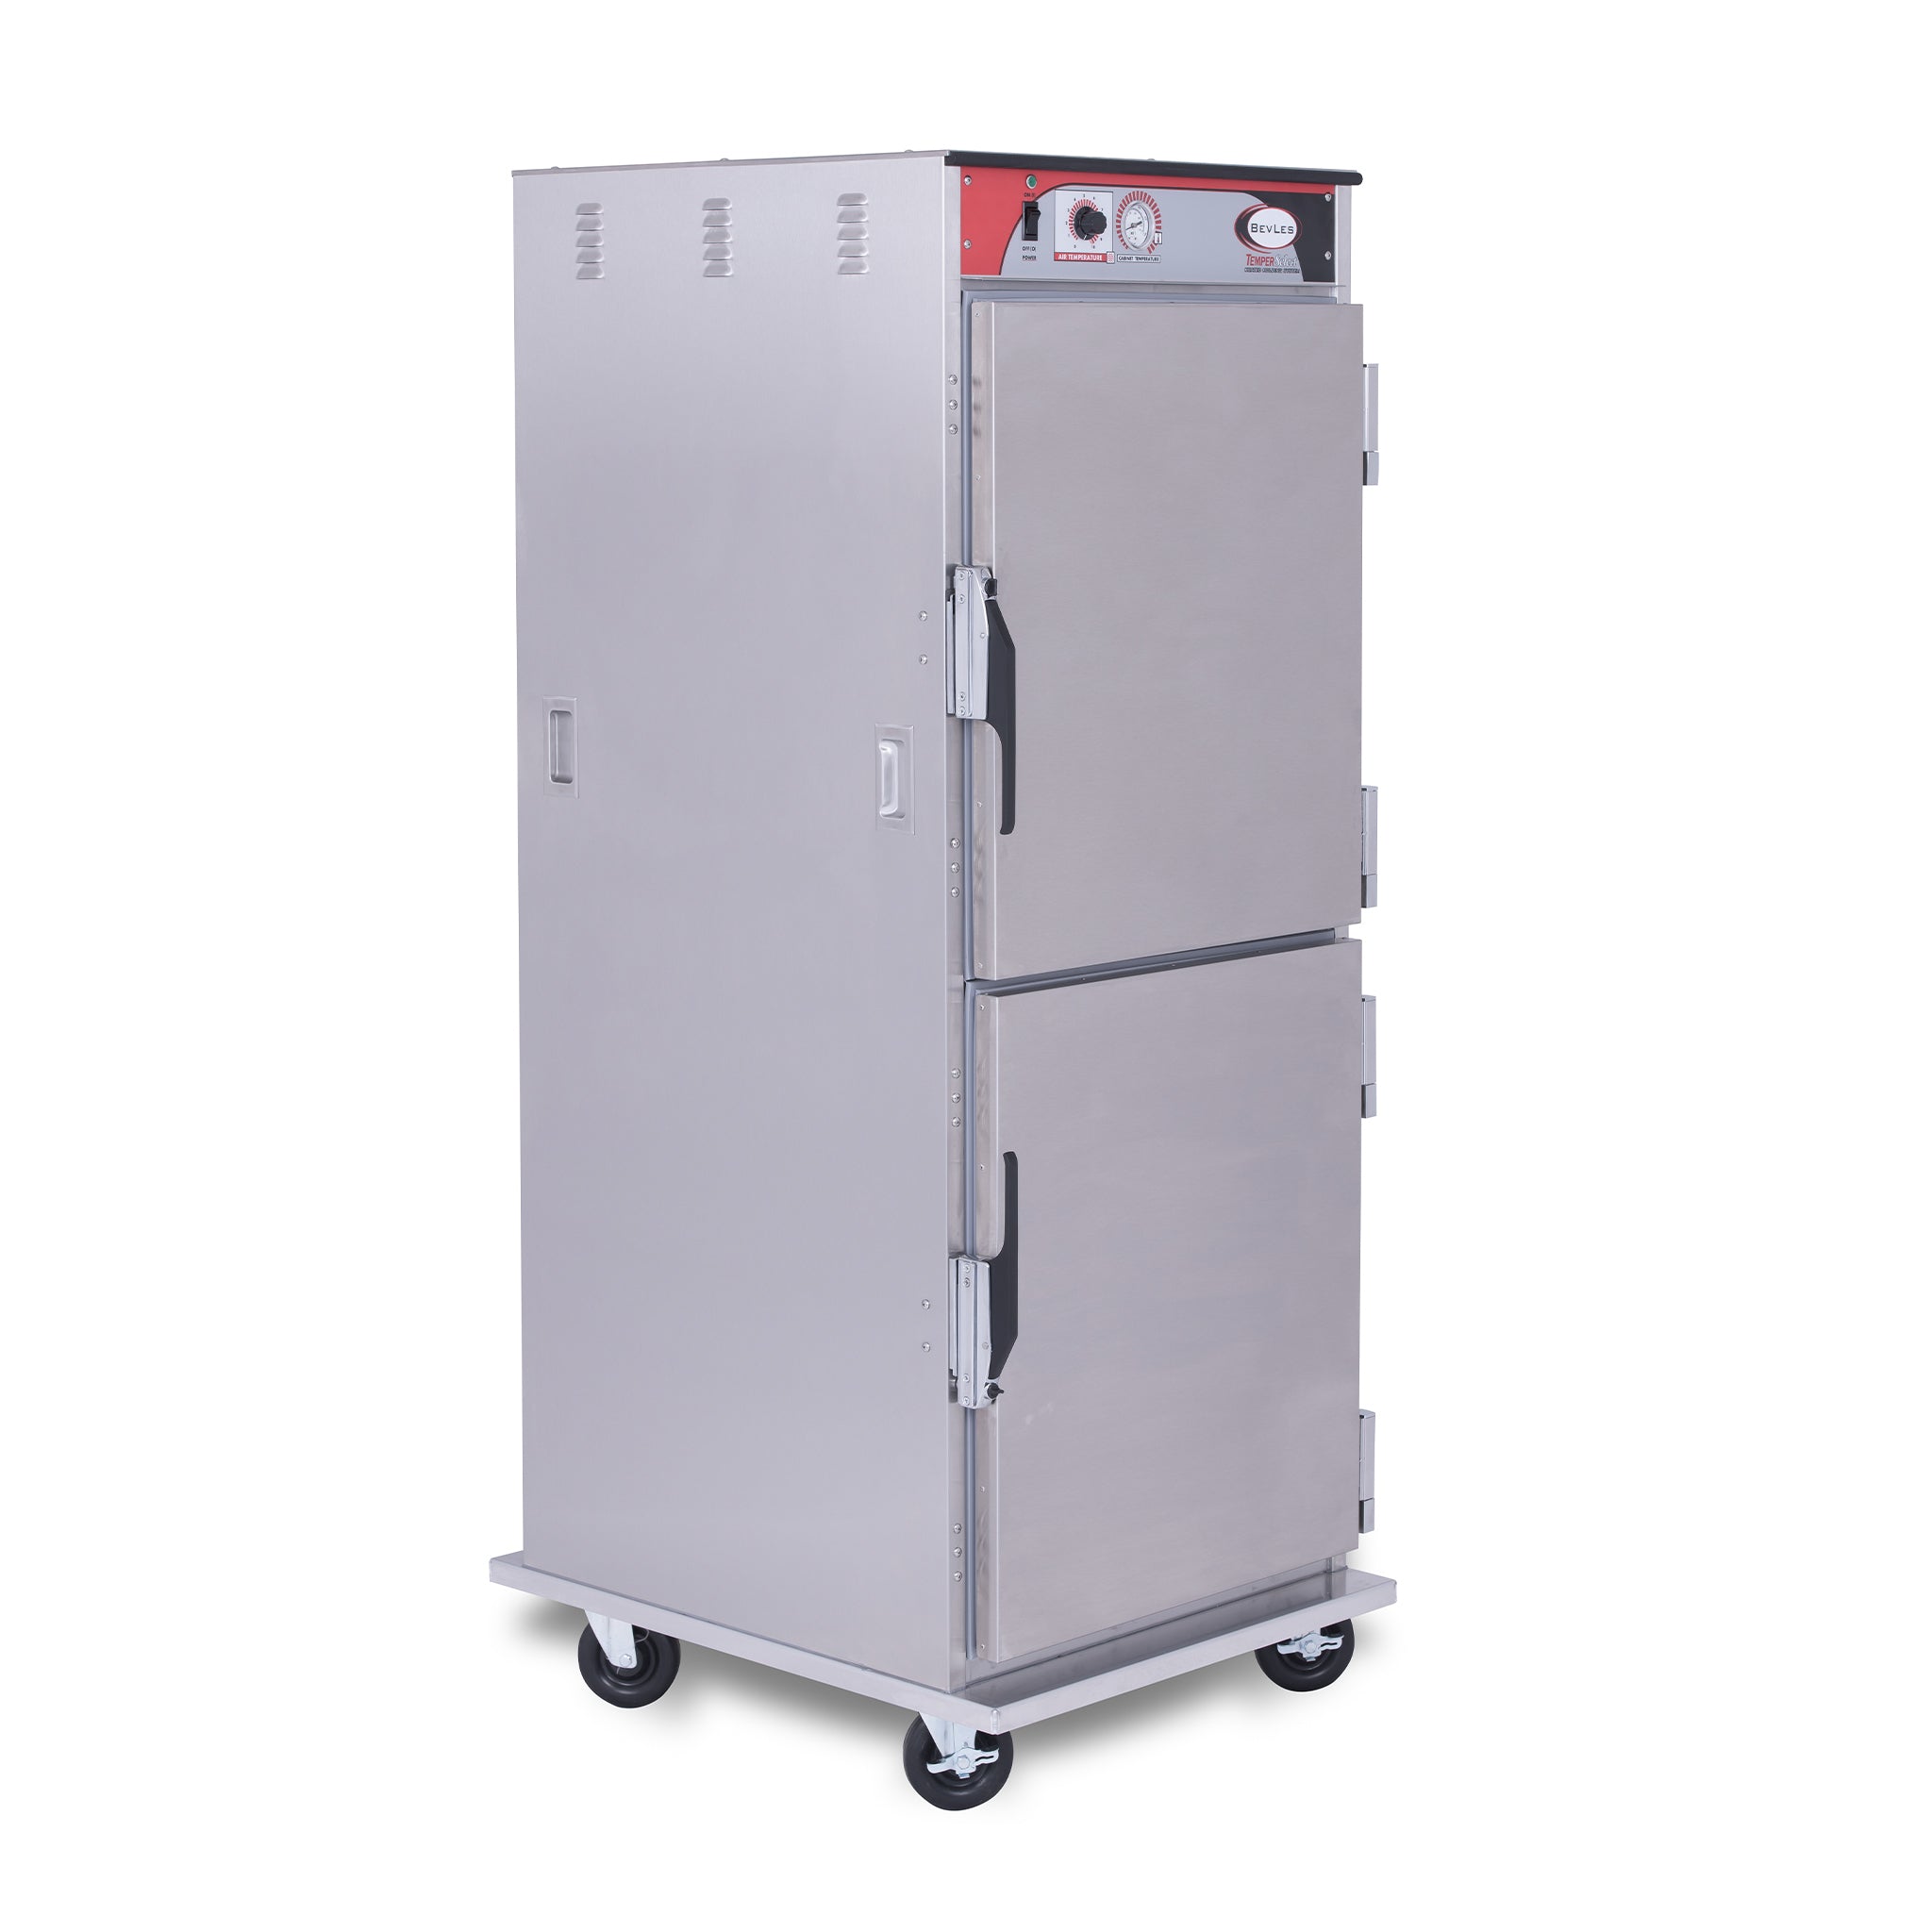 BevLes - HTSS74W124-PT, BevLes Temper Select - Pass Thru Full Size Heated Holding Cabinet, Universal Width, 230V, in Silver